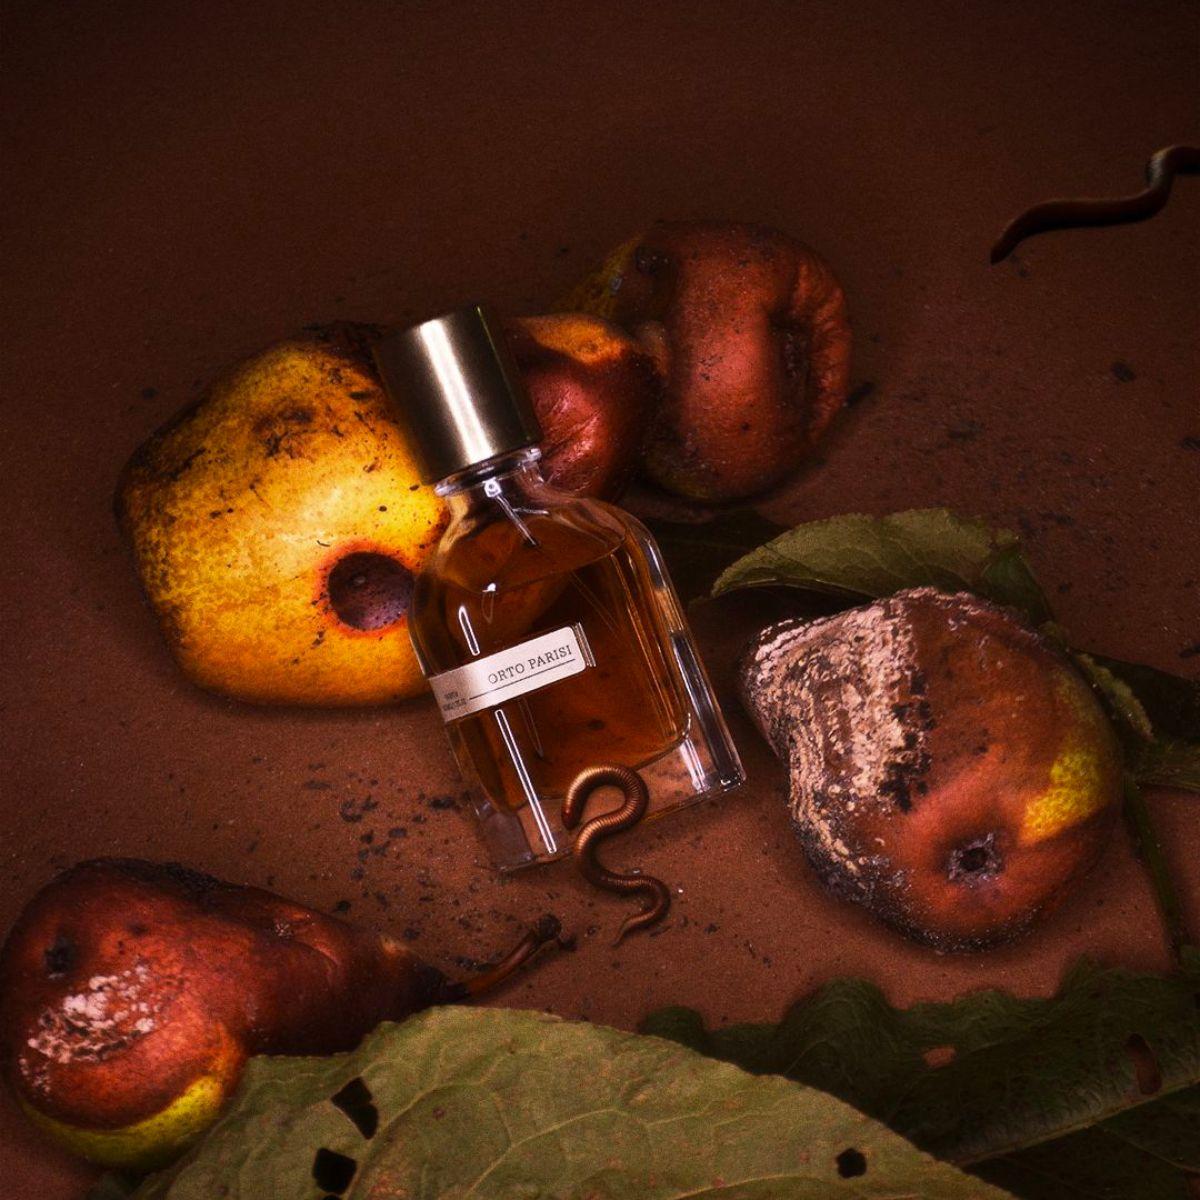 Image of Bergamask by the perfume brand Orto Parisi